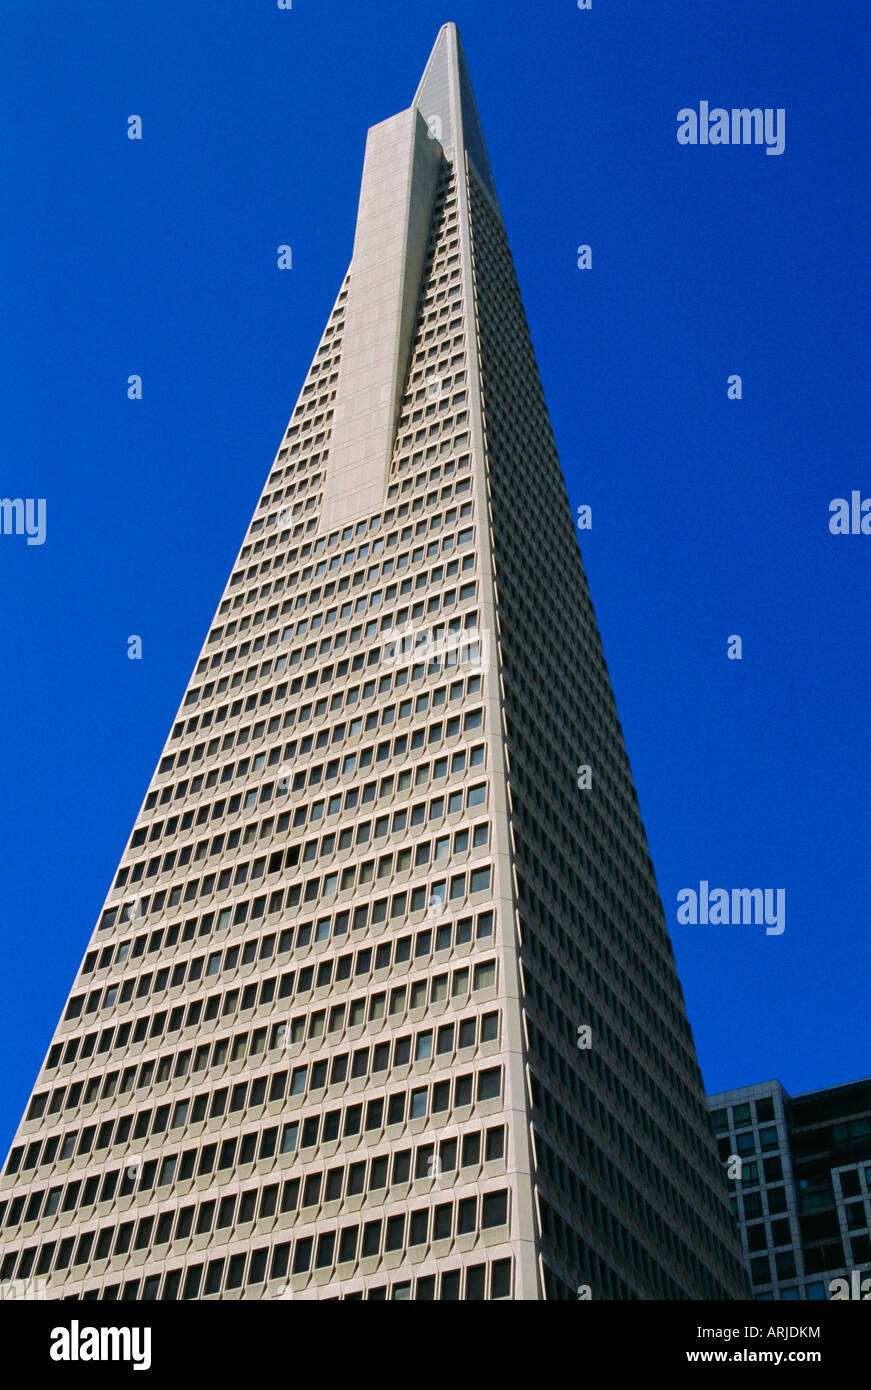 The TransAmerica Pyramid, at 260m the tallest building in San Francisco, California, USA Stock Photo